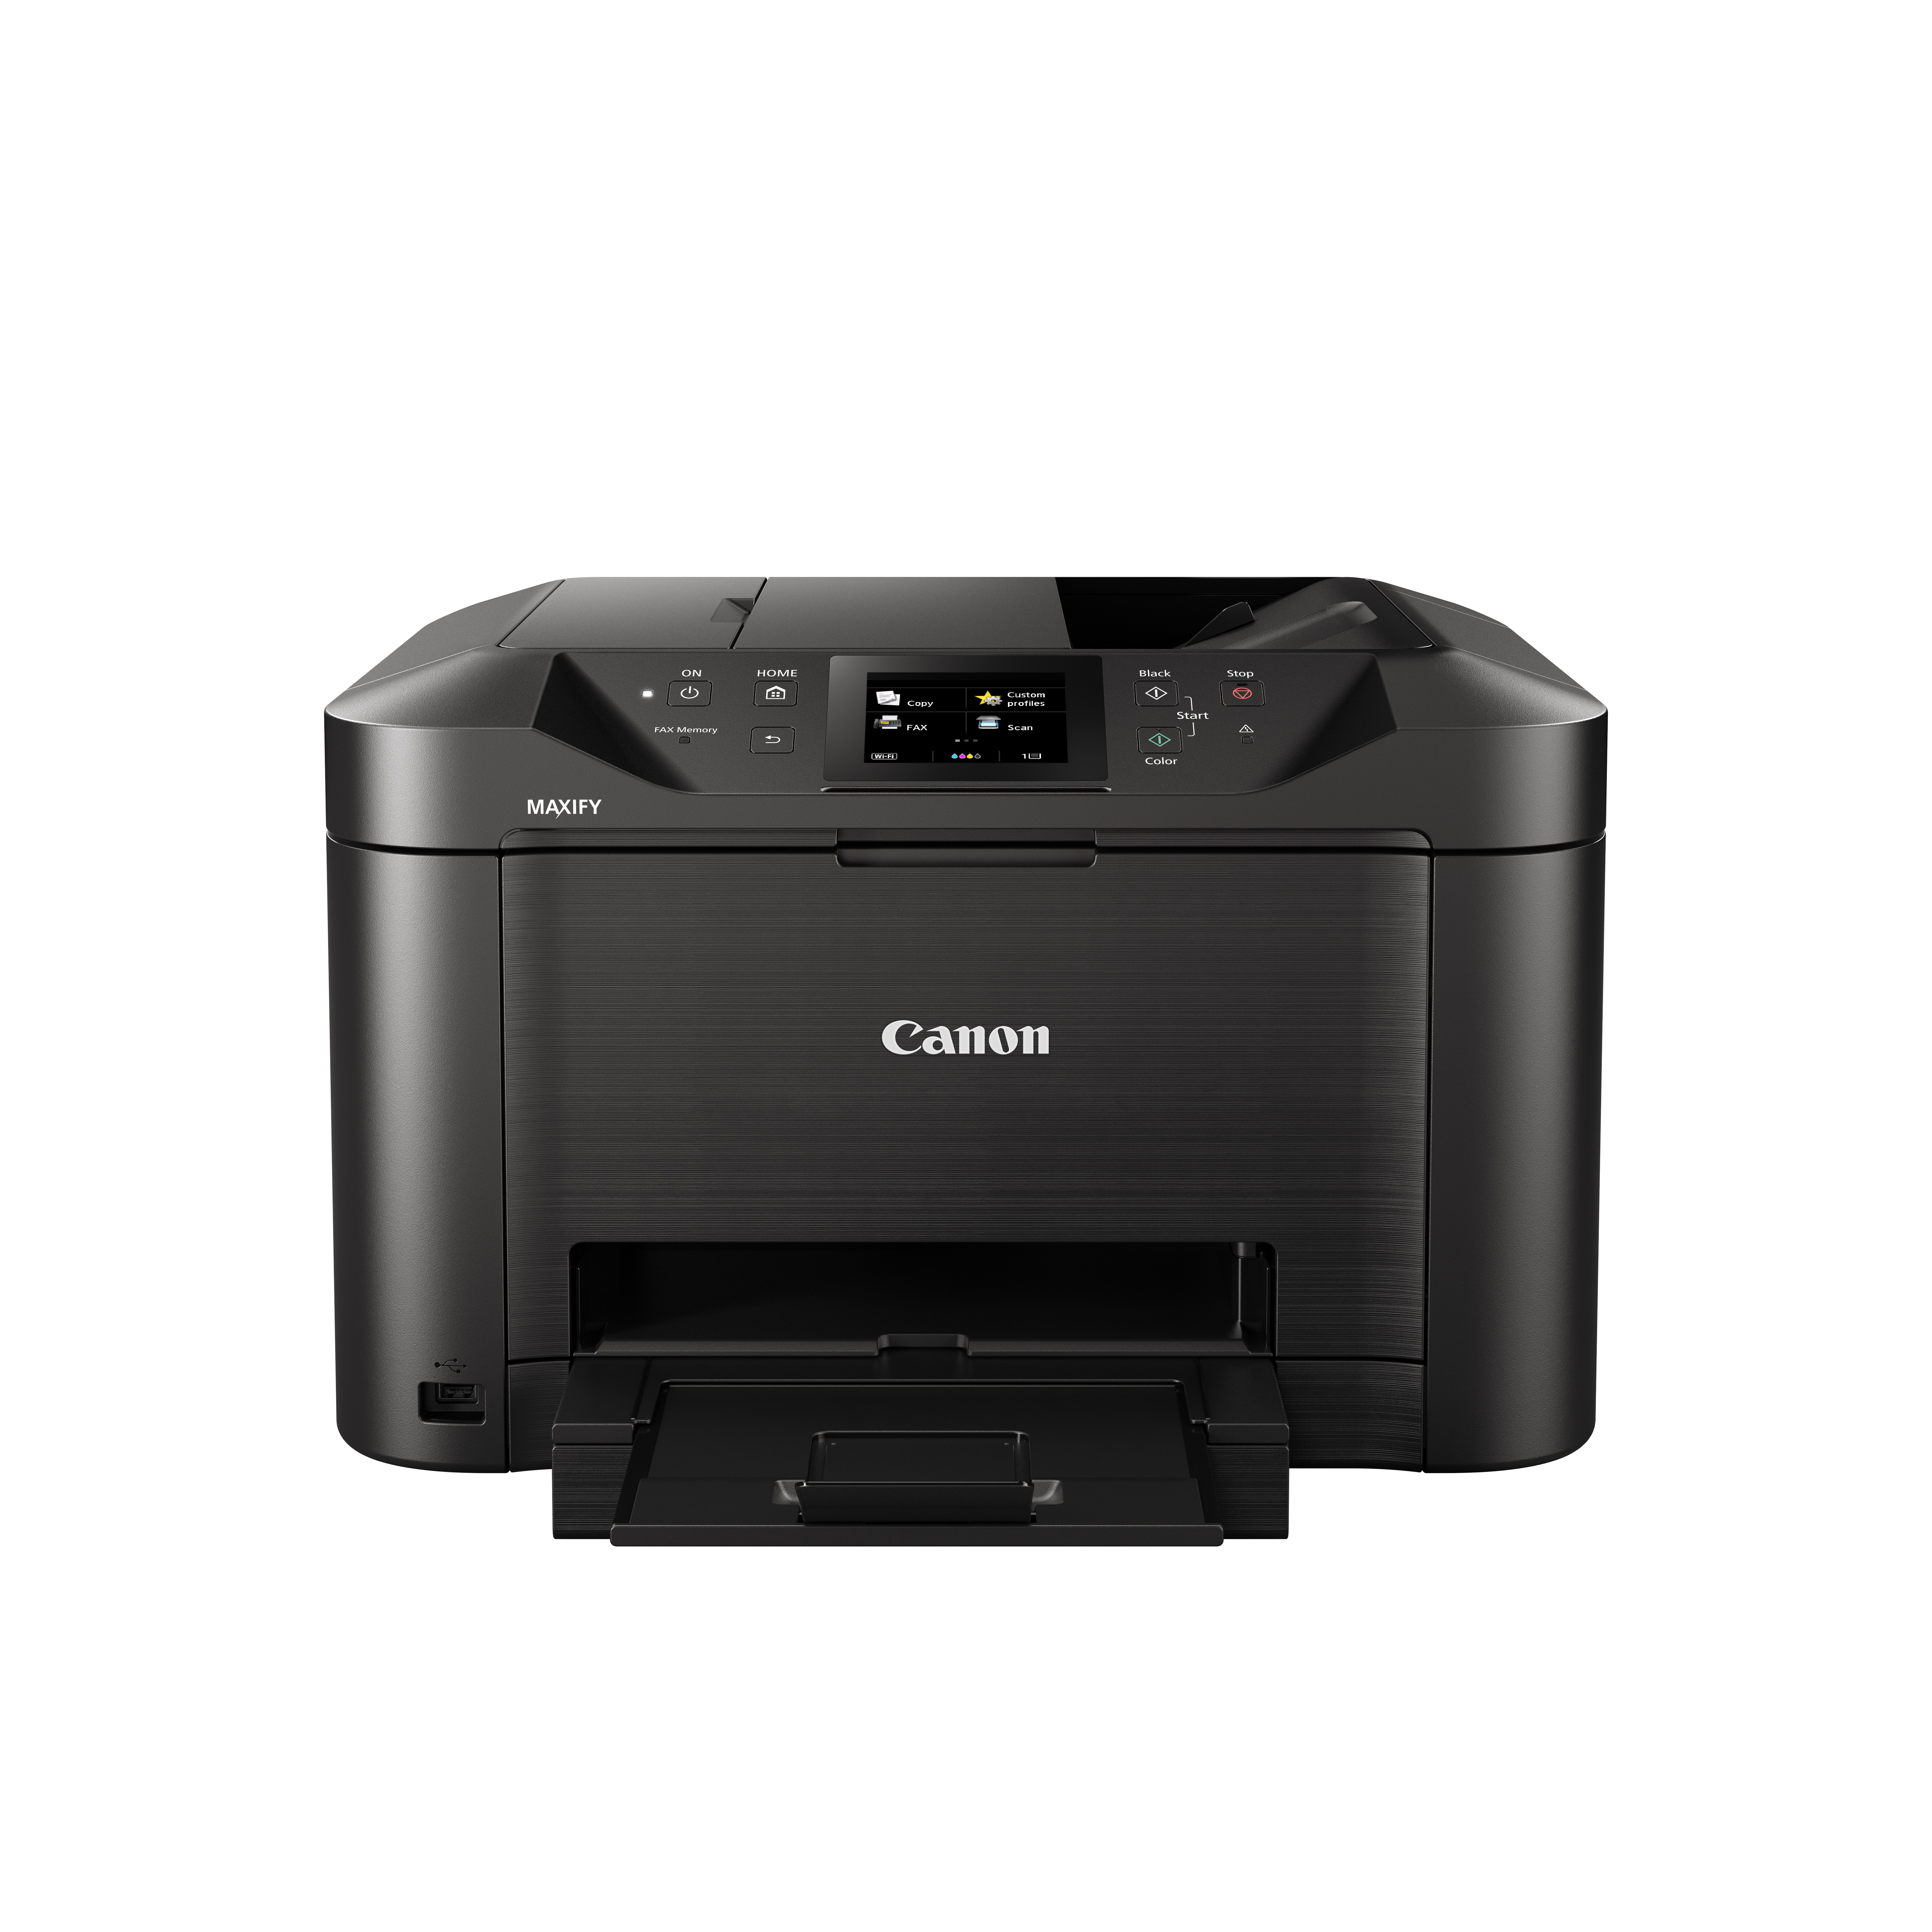 Canon MB5150